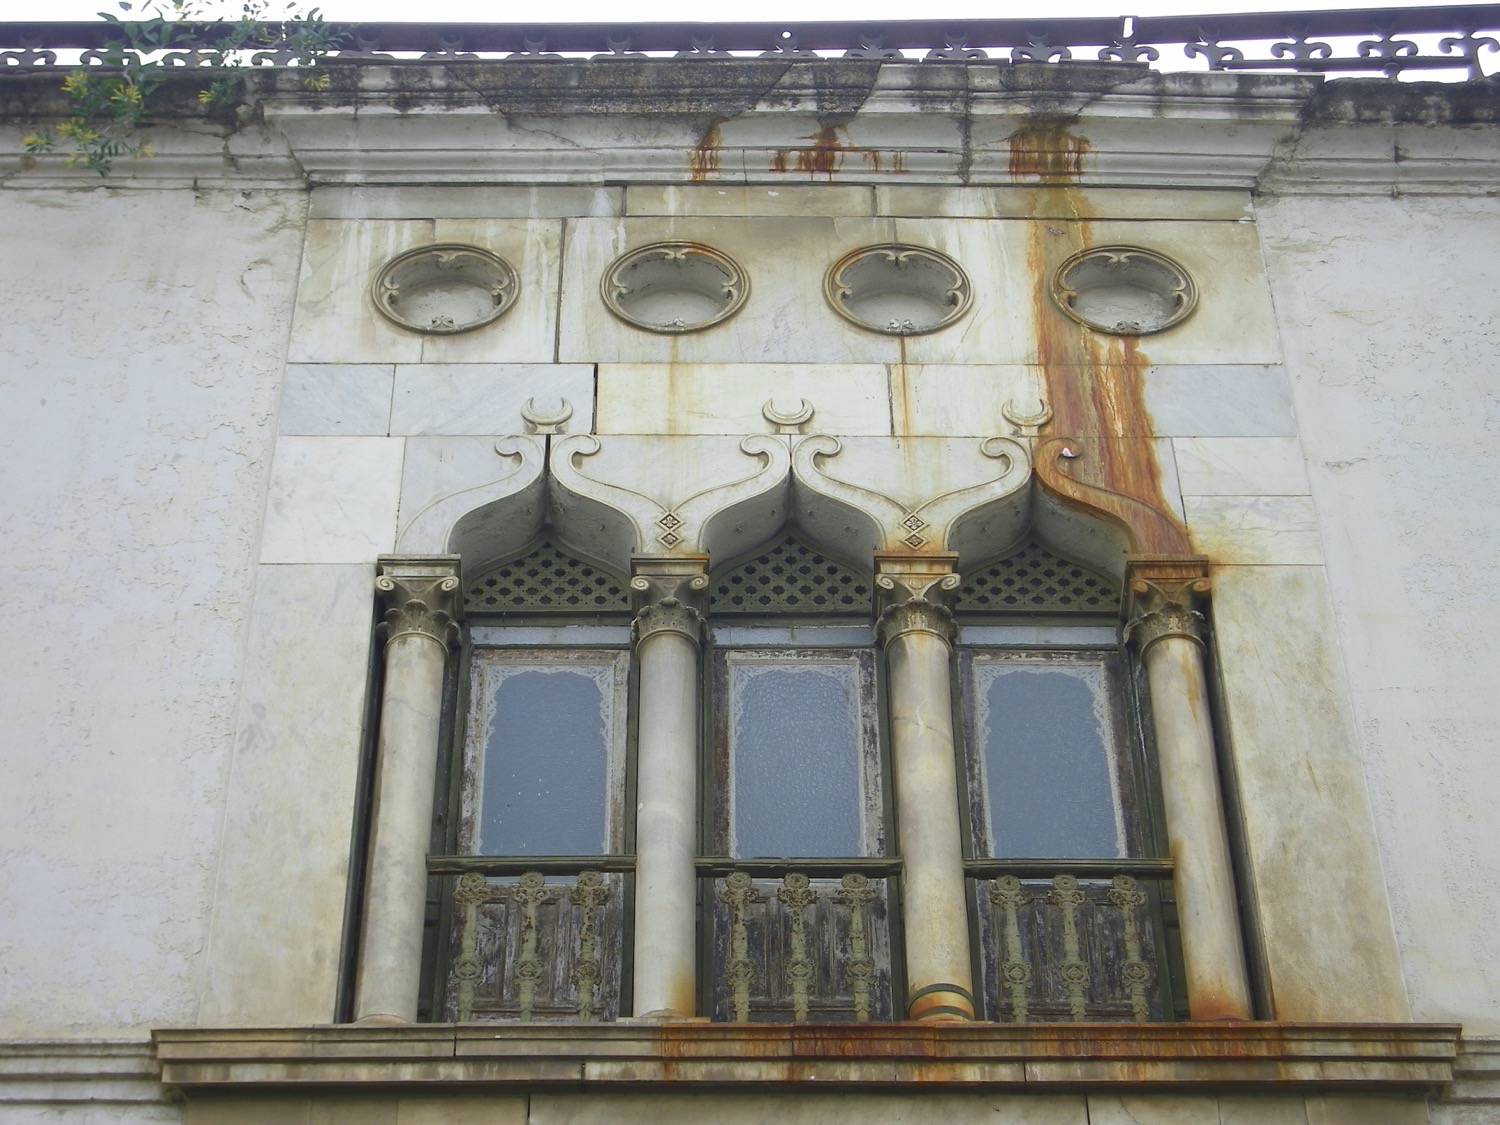 Exterior view of a tripartite window with a balconet and four circular windows above